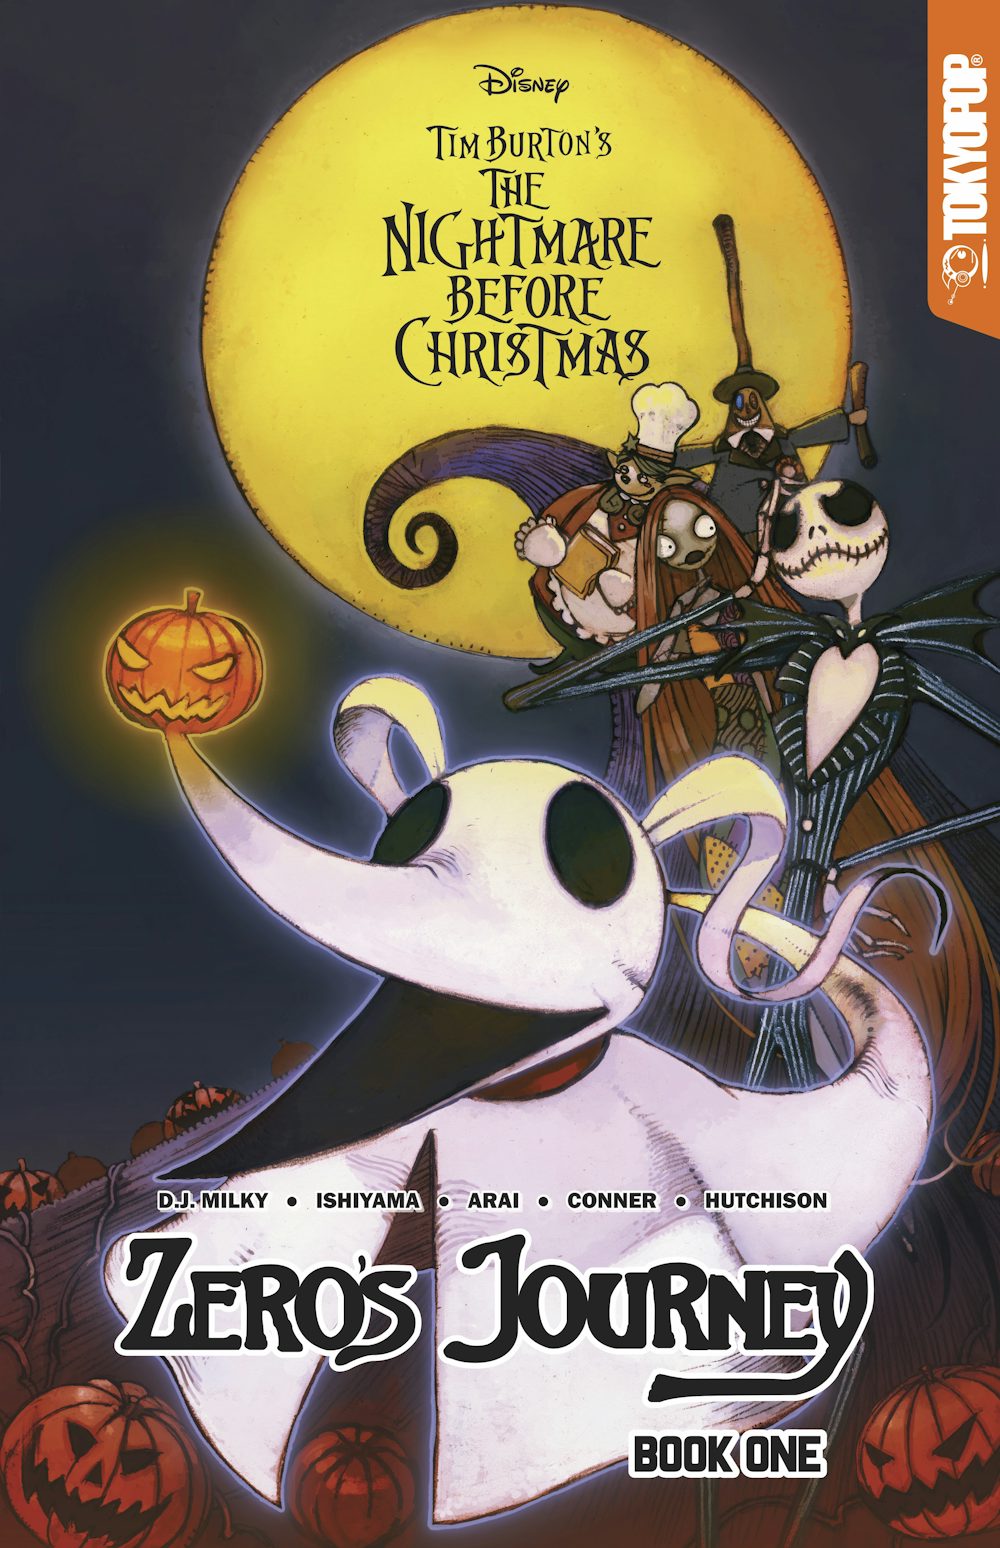 Tim Burton's The Nightmare Before Christmas: The Film - The Art - The Vision [Book]